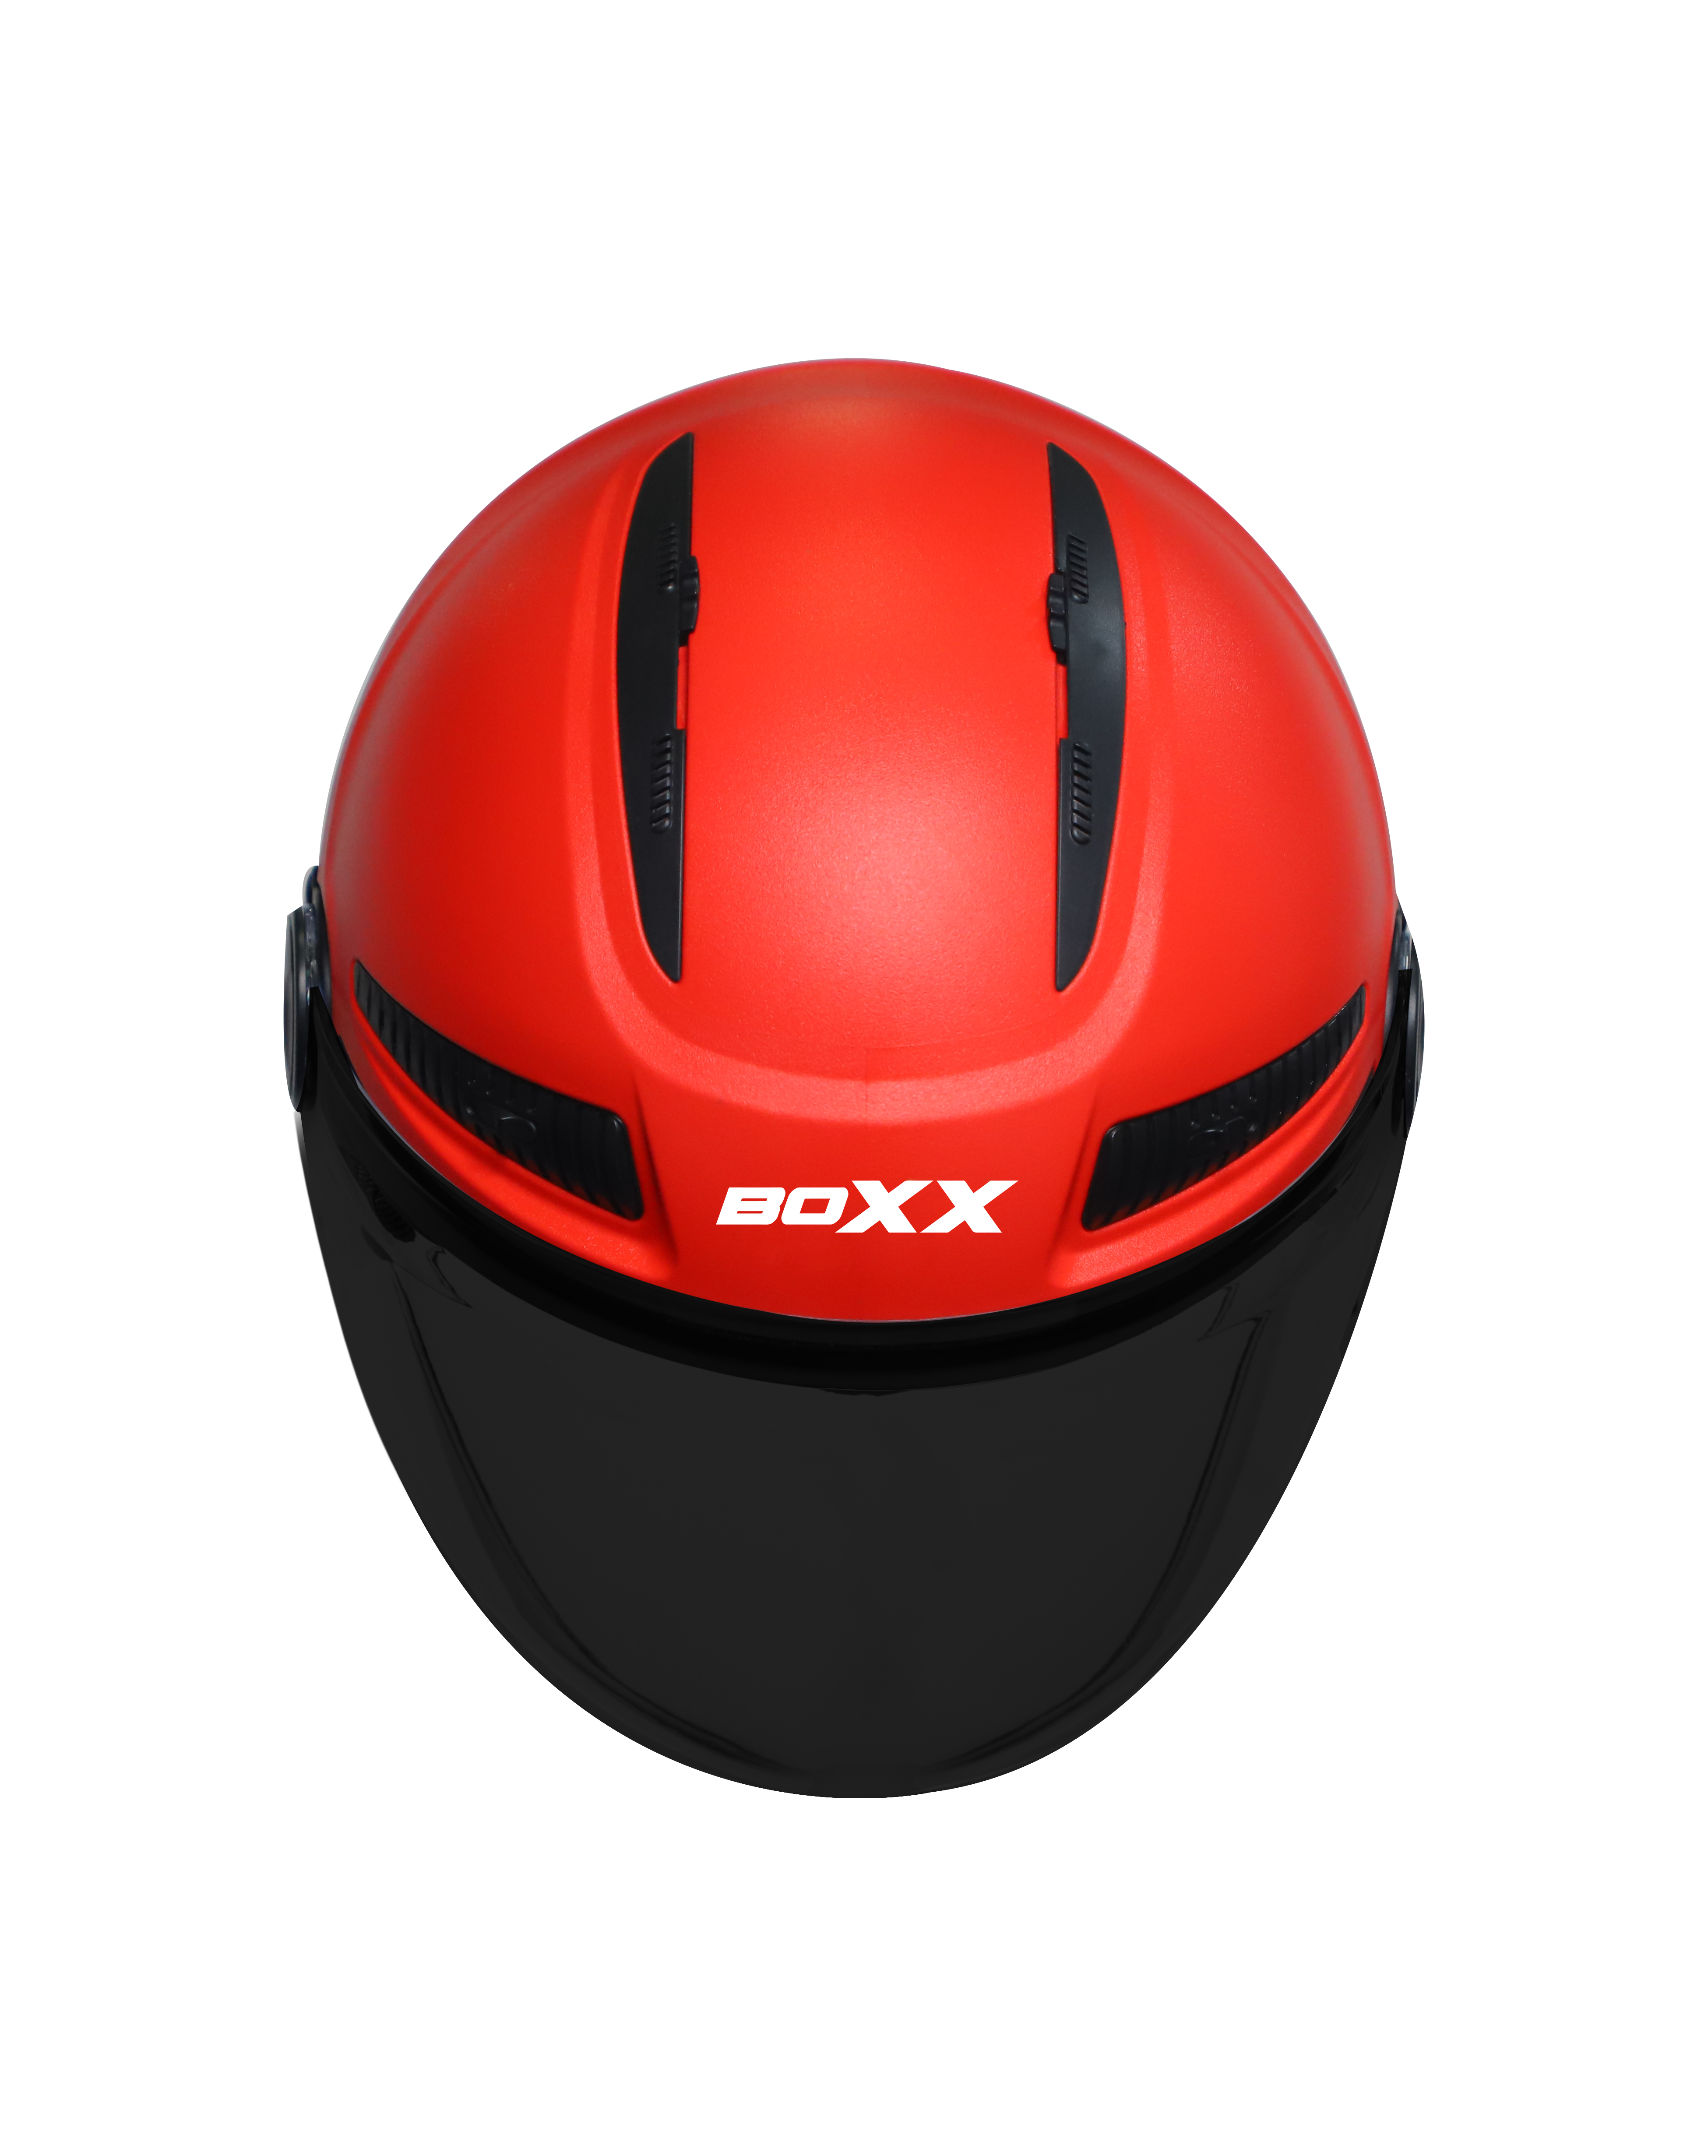 Steelbird SBH-24 Boxx Dashing ISI Certified Open Face Helmet For Men And Women (Red With Smoke Visor)